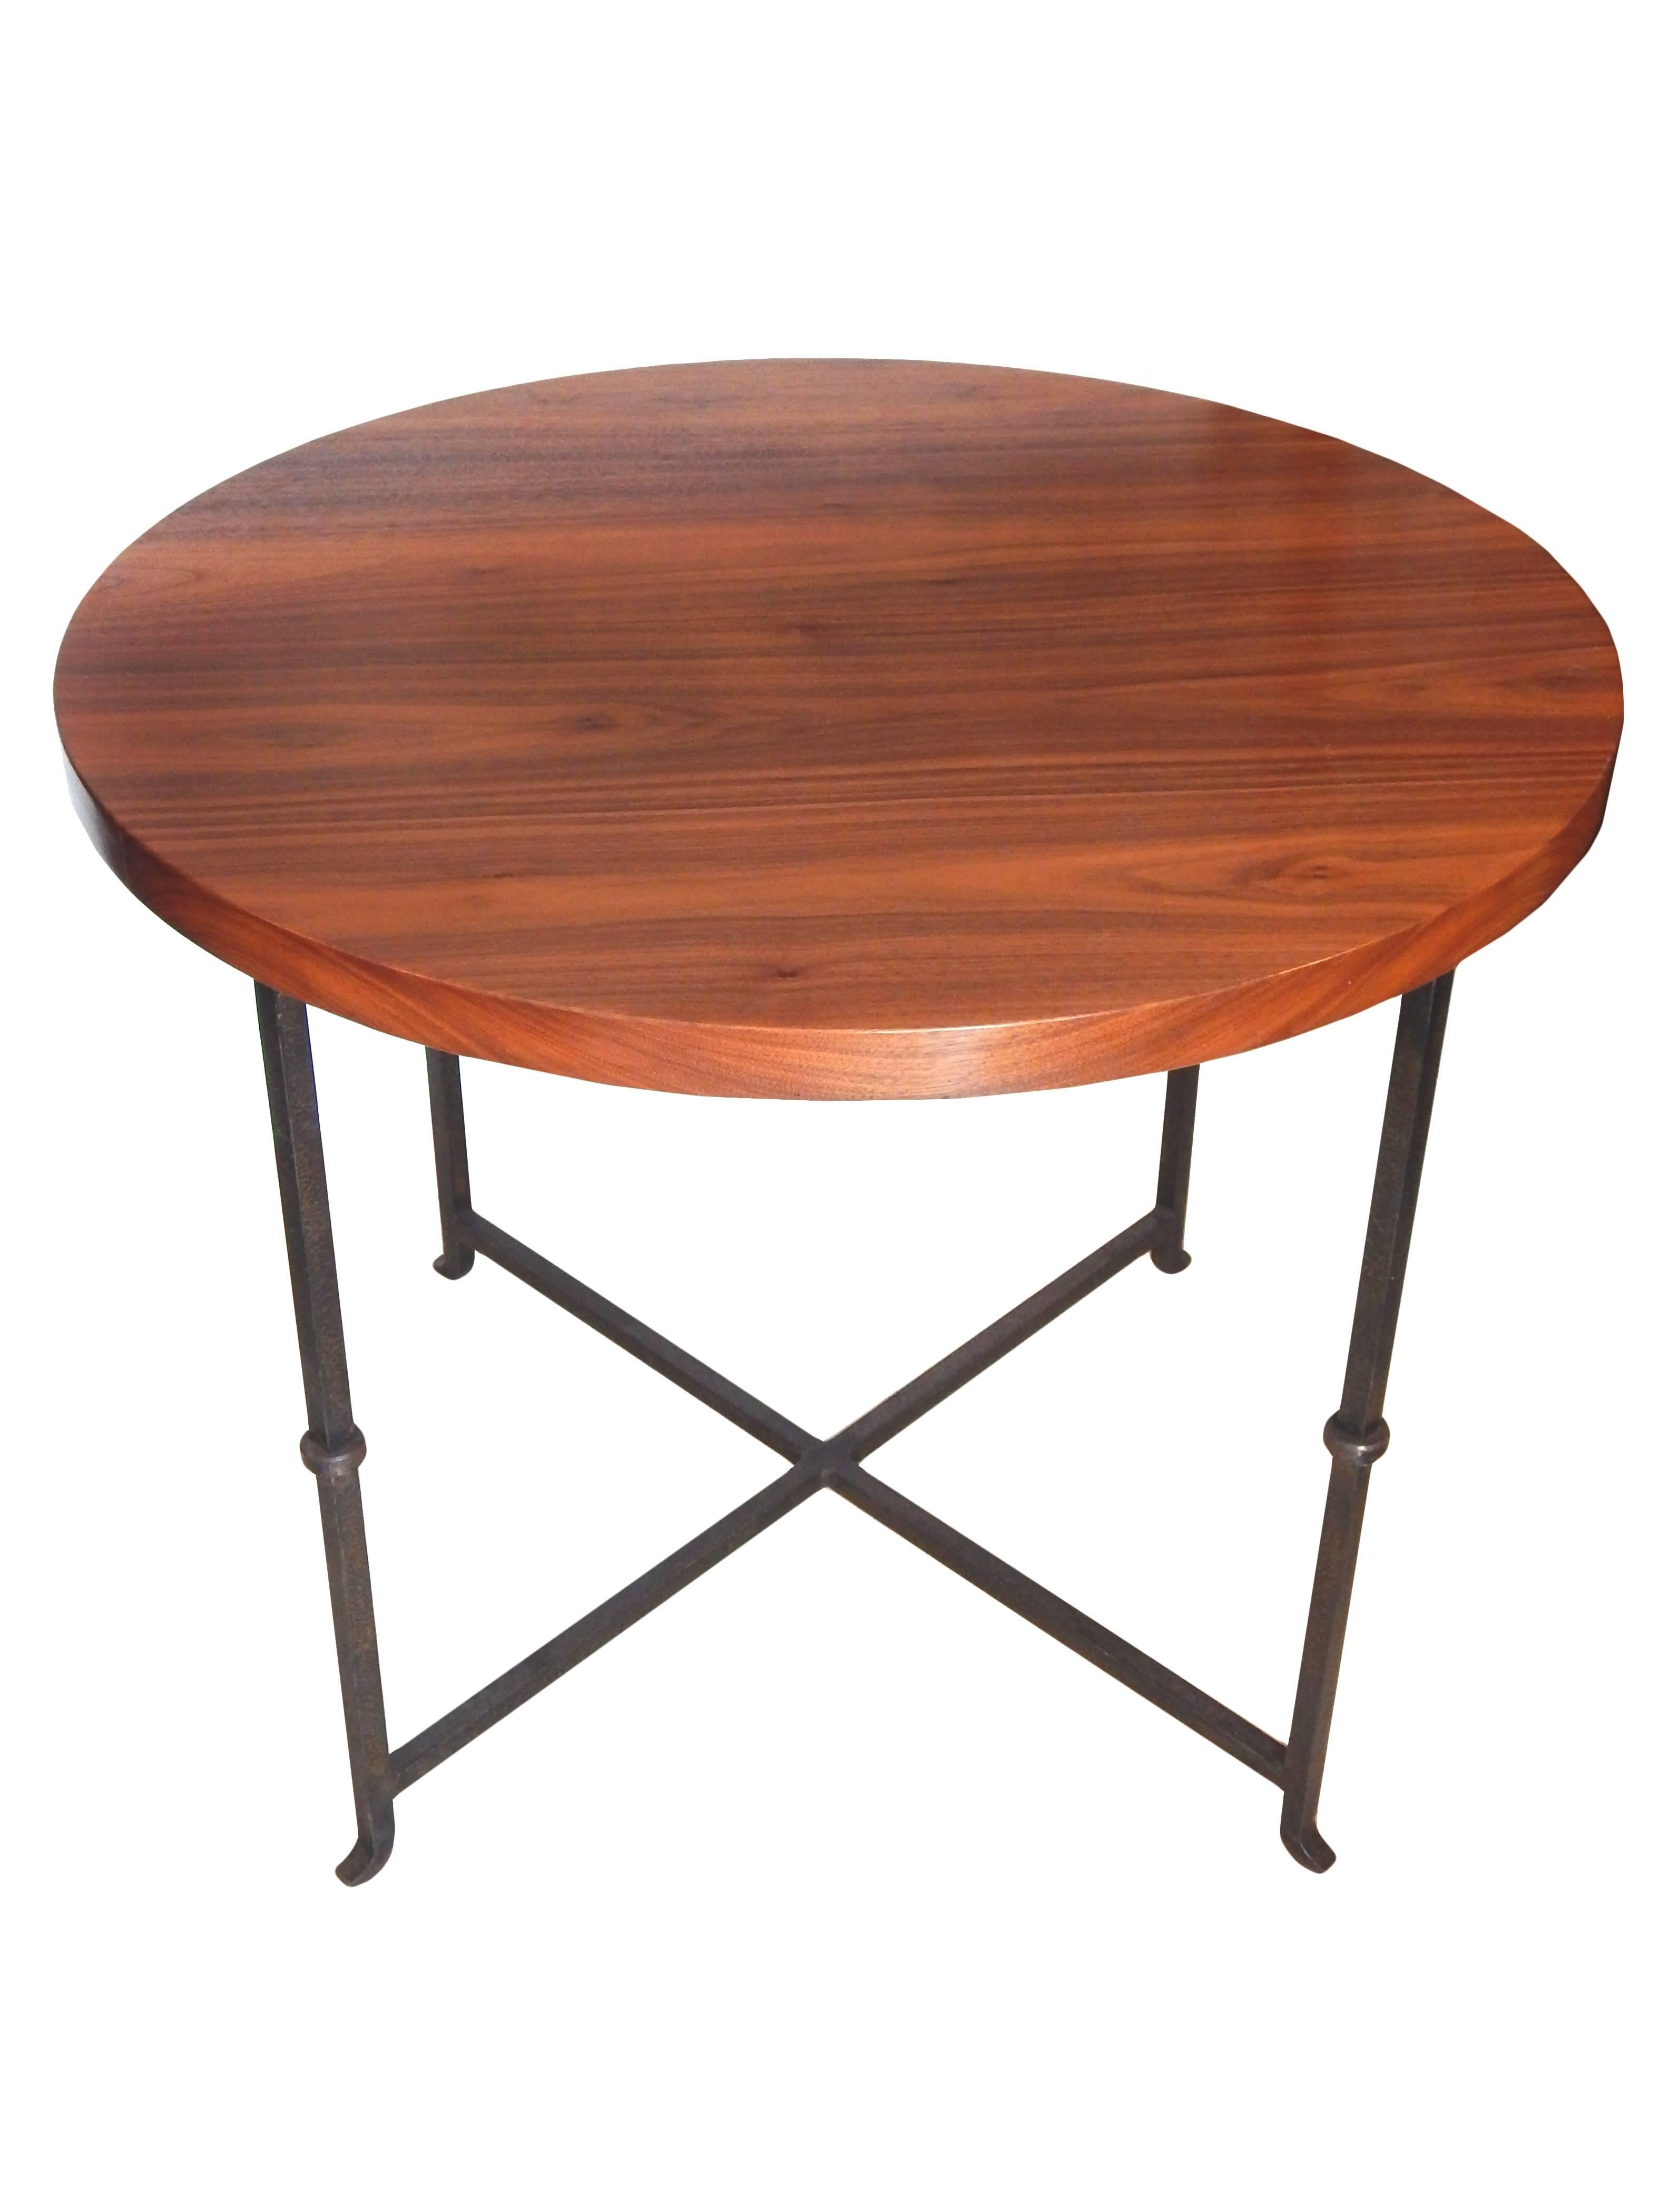 Mid-Century Modern Round Iron Based Table For Sale